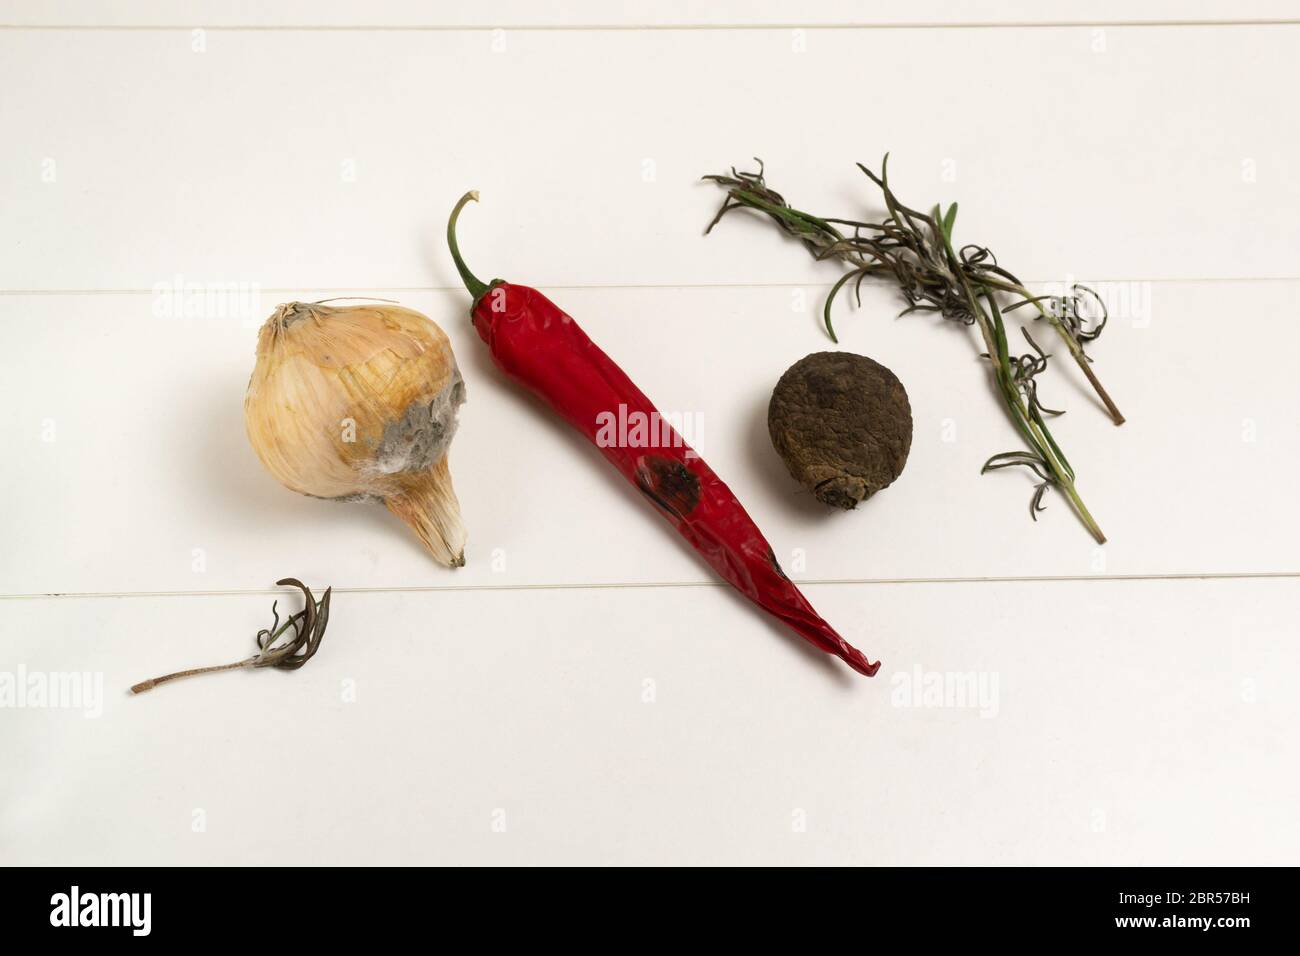 Rotten onions and red peppers, dried rosemary and beets. Horizontal orientation Stock Photo